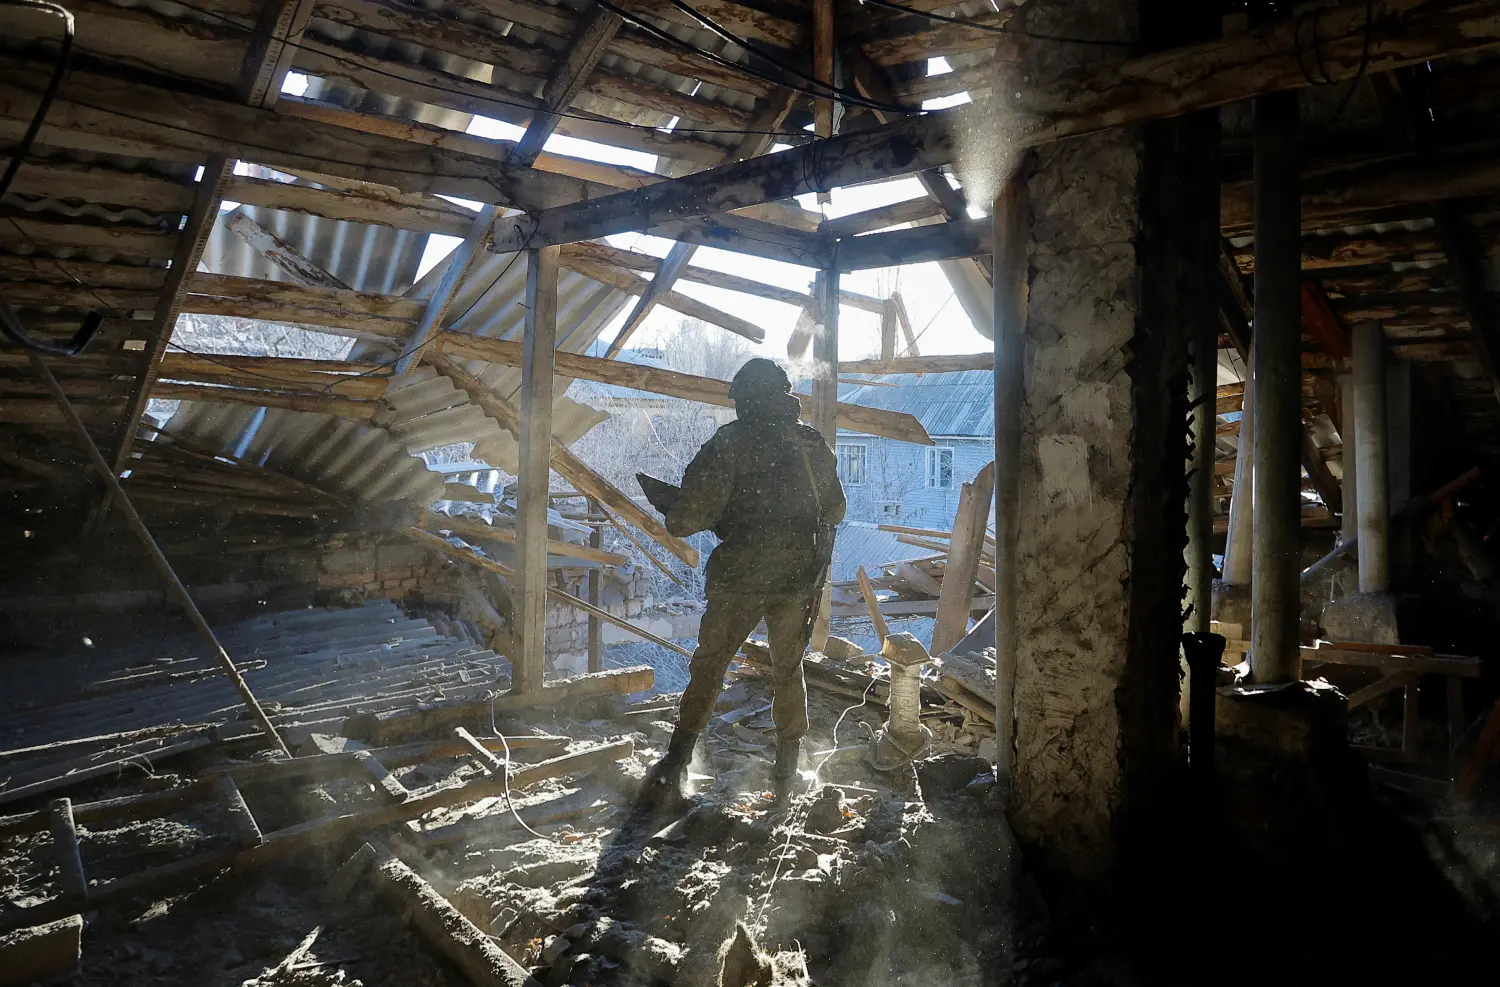 A Russian military investigator works inside a residential building heavily damaged in recent shelling in the course of Russia-Ukraine conflict in Donetsk, Russian-controlled Ukraine, December 6, 2022. REUTERS/Alexander Ermochenko